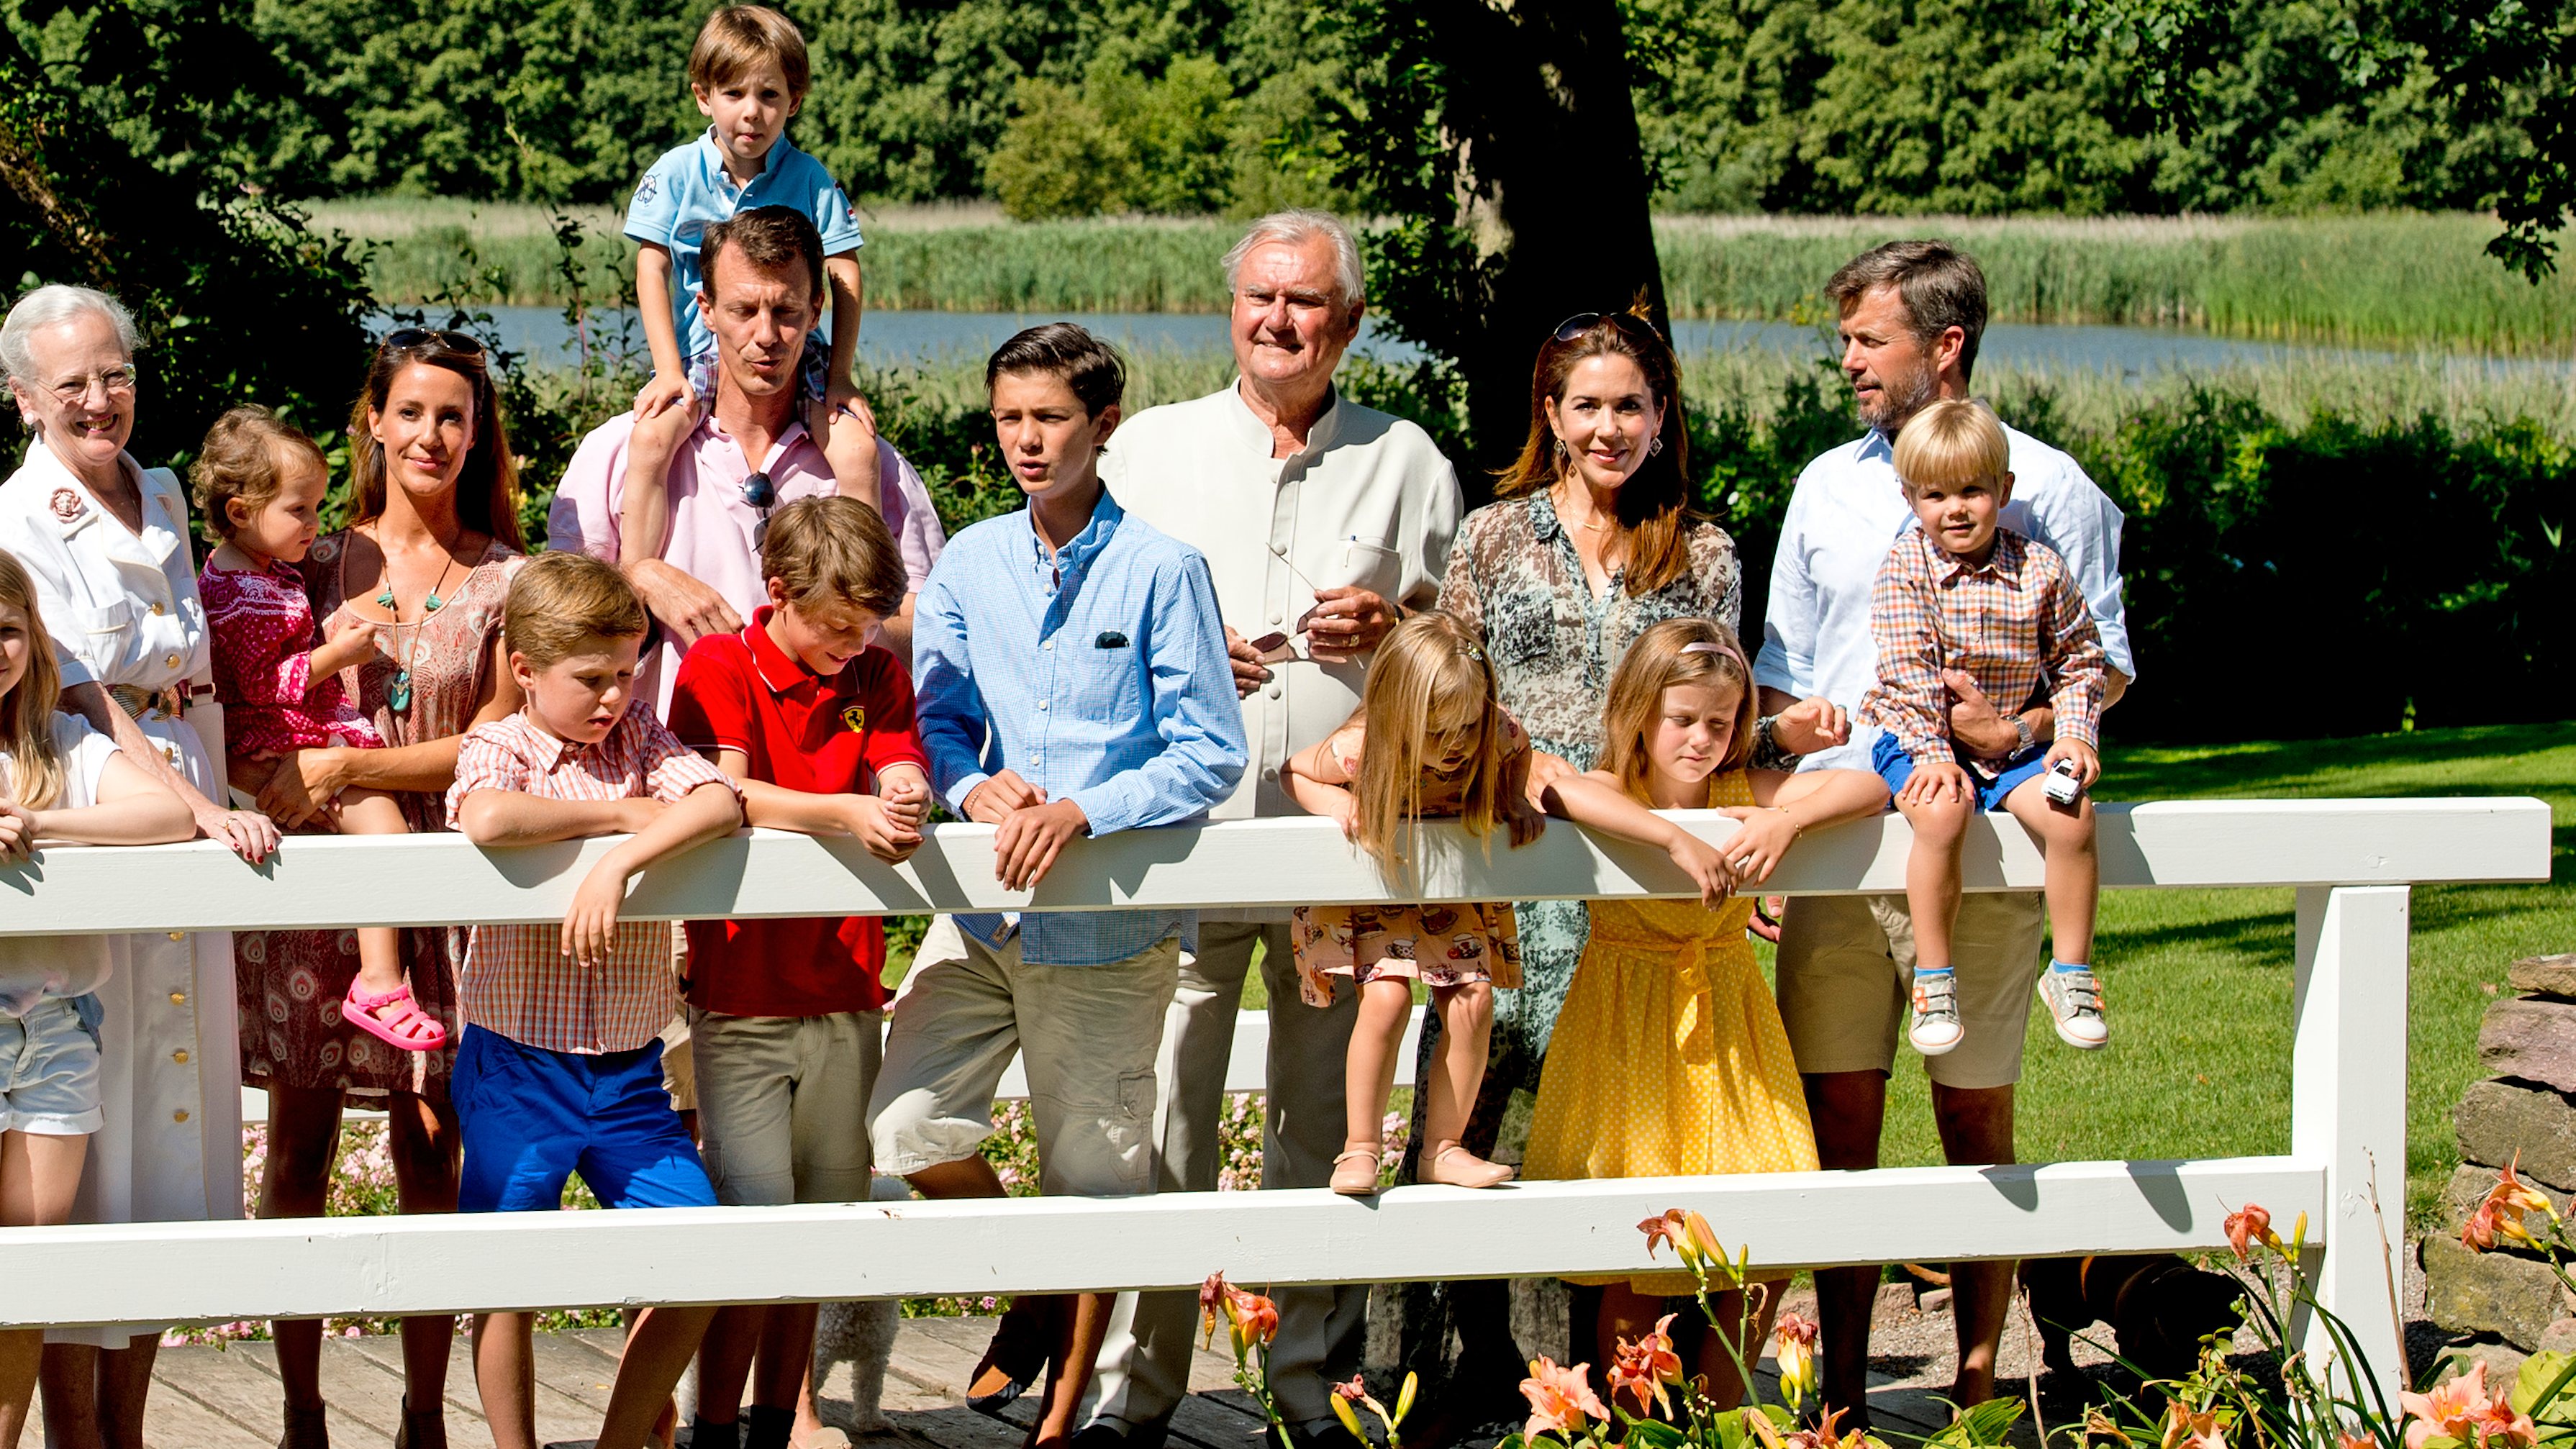 The Danish Royal Family Hold Annual Summer Photocall